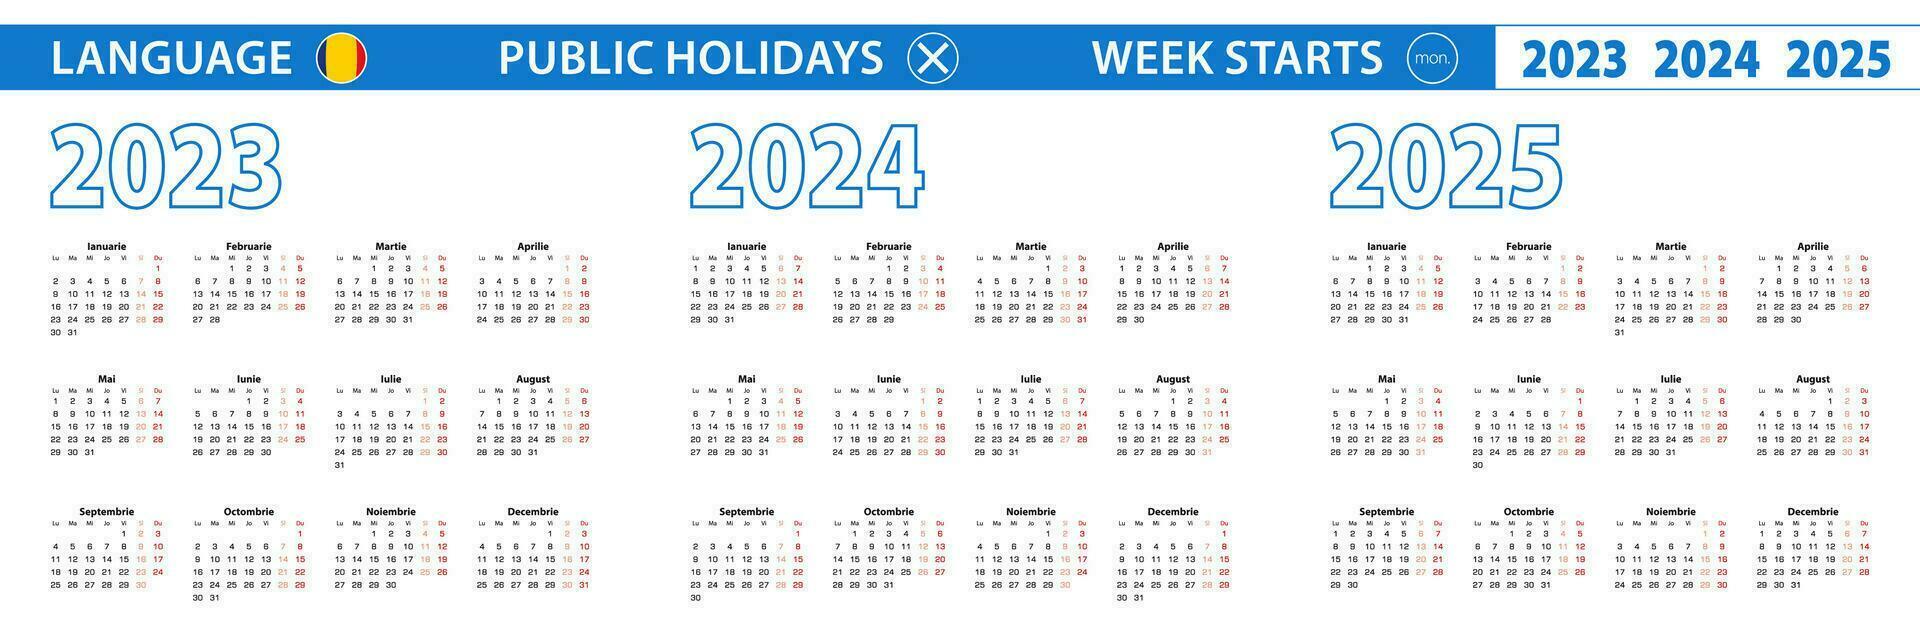 Simple calendar template in Romanian for 2023, 2024, 2025 years. Week starts from Monday. vector